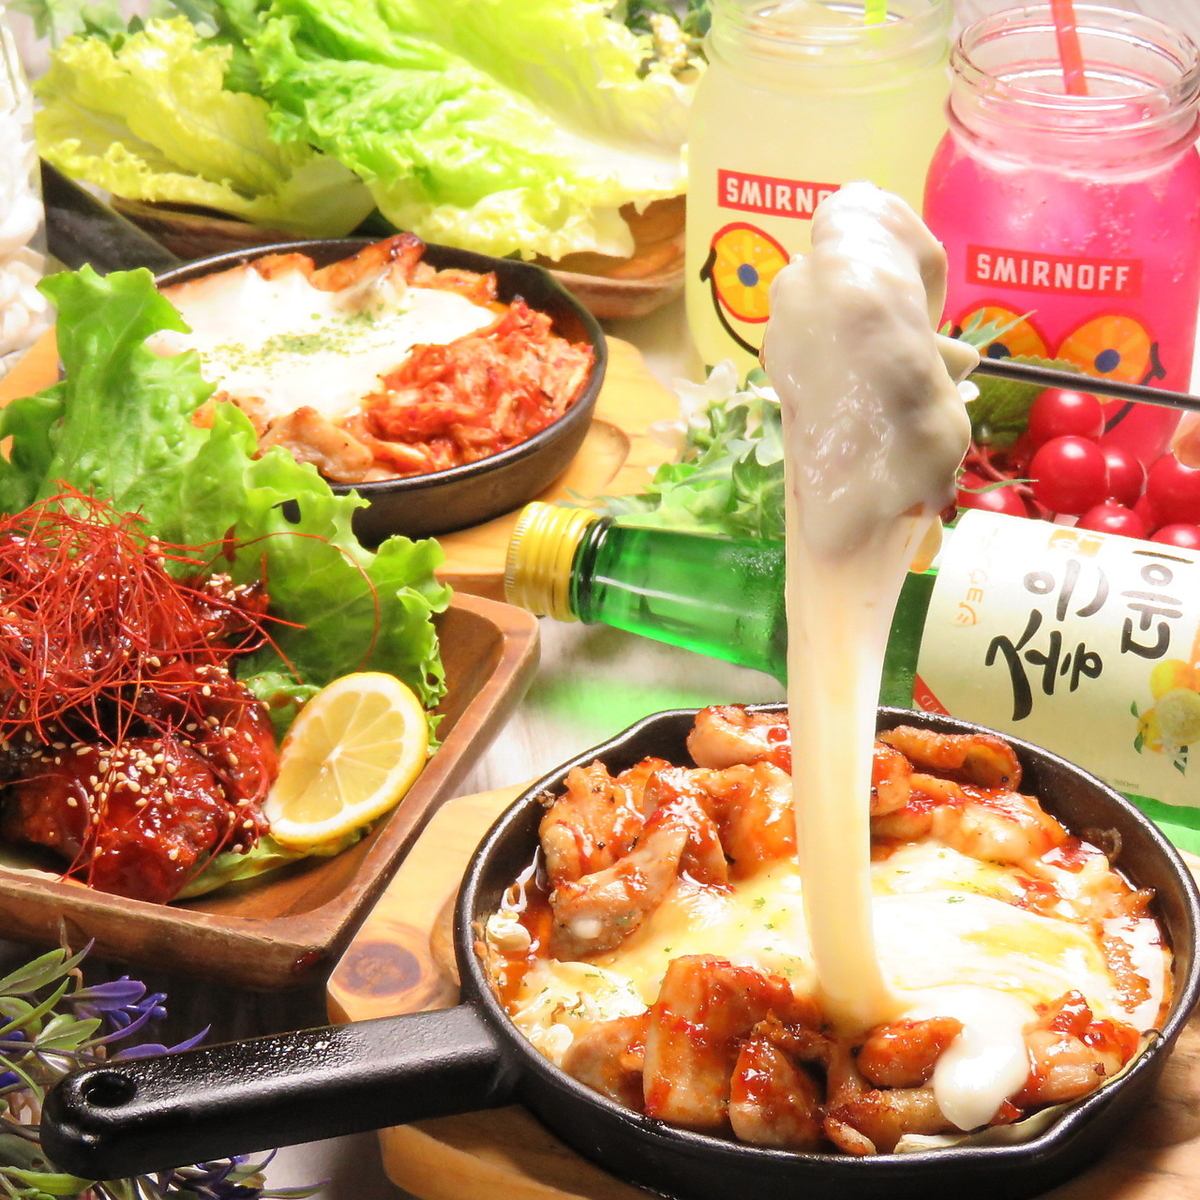 Popular Korean dishes such as samgyeopsal and yangnyeom chicken are also available.